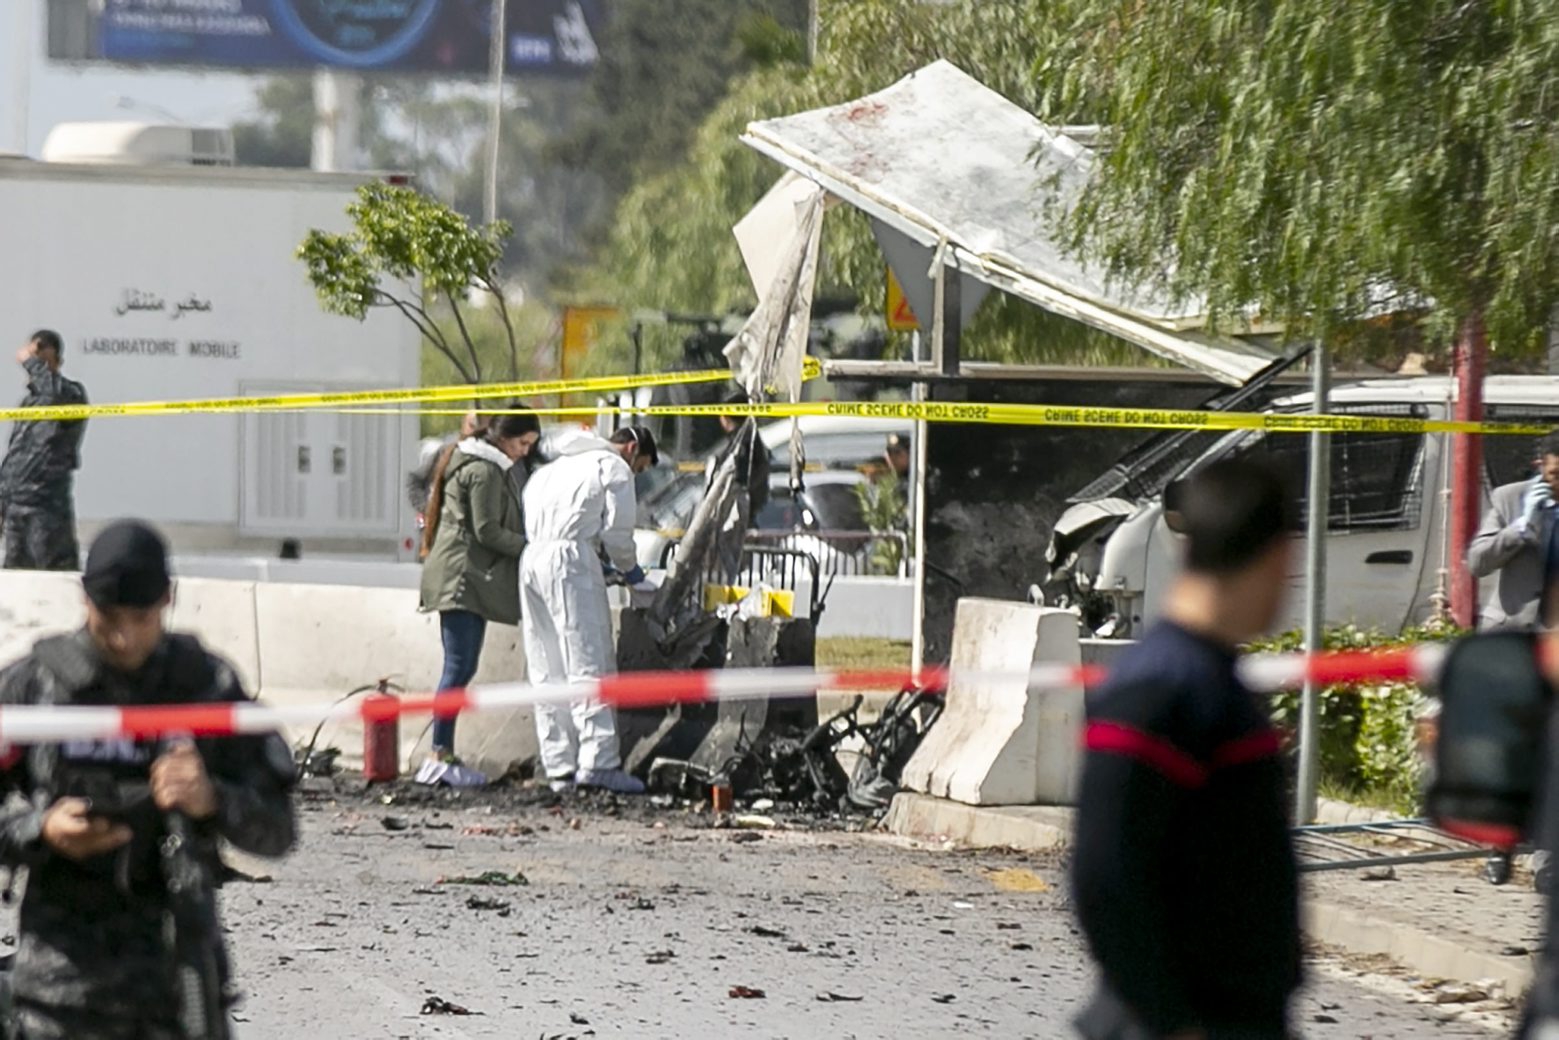 Forensic officers work on a blast site near the US Embassy in Tunis, Friday, March 6, 2020. Tunisian media are reporting that two people on a motorcycle have set off a blast near the U.S. Embassy in the capital Tunis, the private Radio Mosaique said that five police officers were wounded and described it as a suicide attack. (AP Photo/Riadh Dridi) Tunisia Explosion